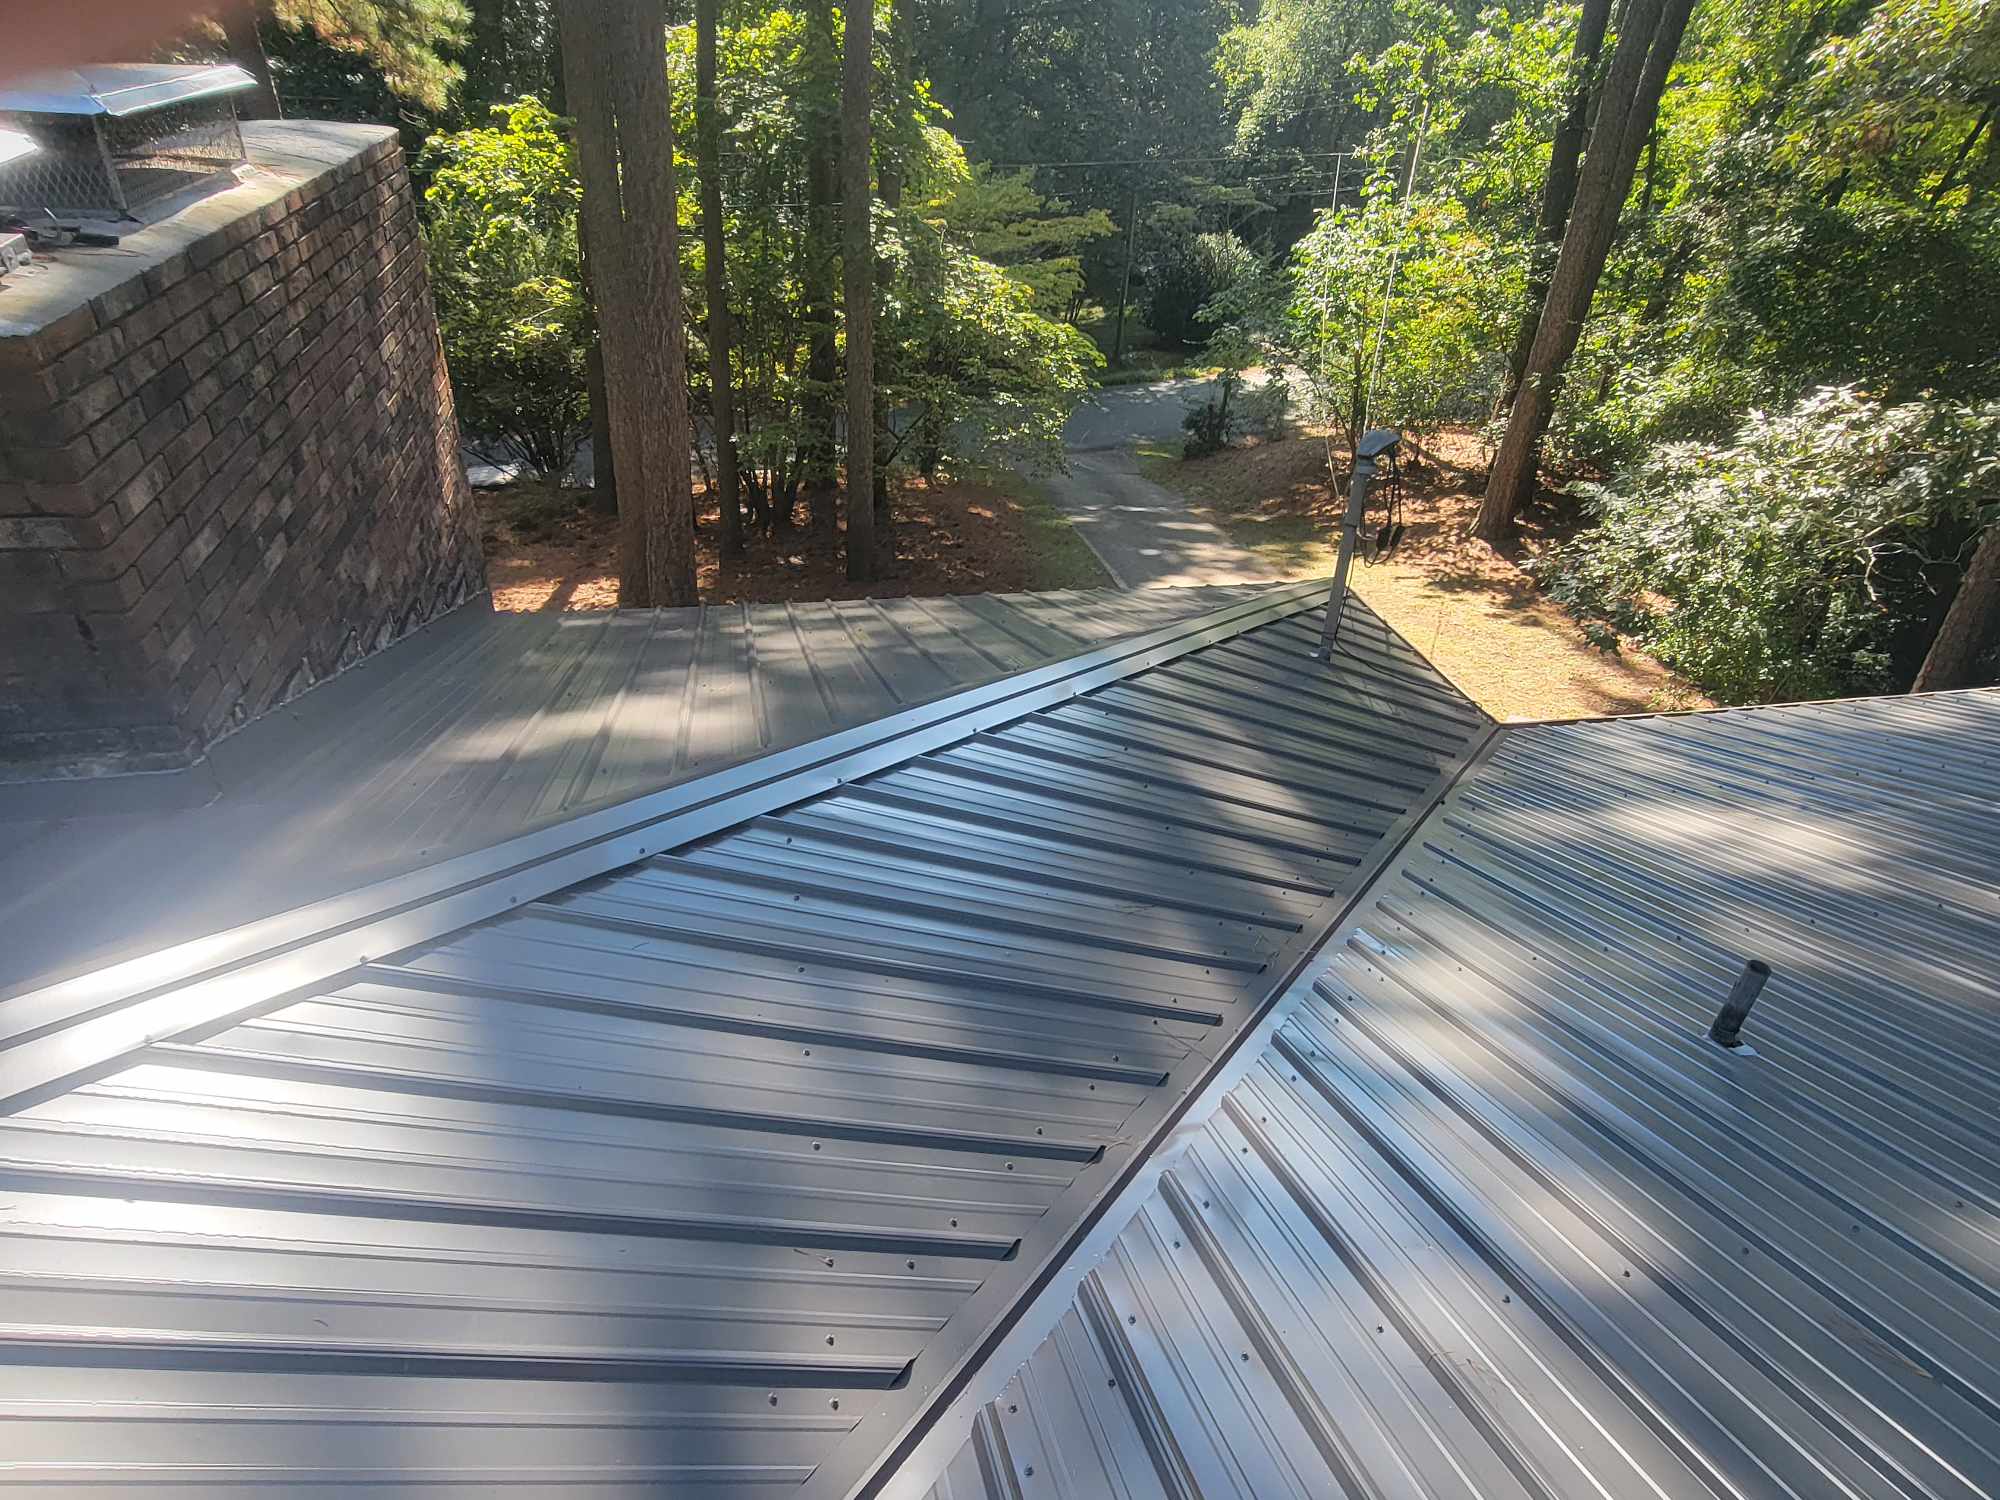 Metal roofing service in Hillsborough, NC with valleys